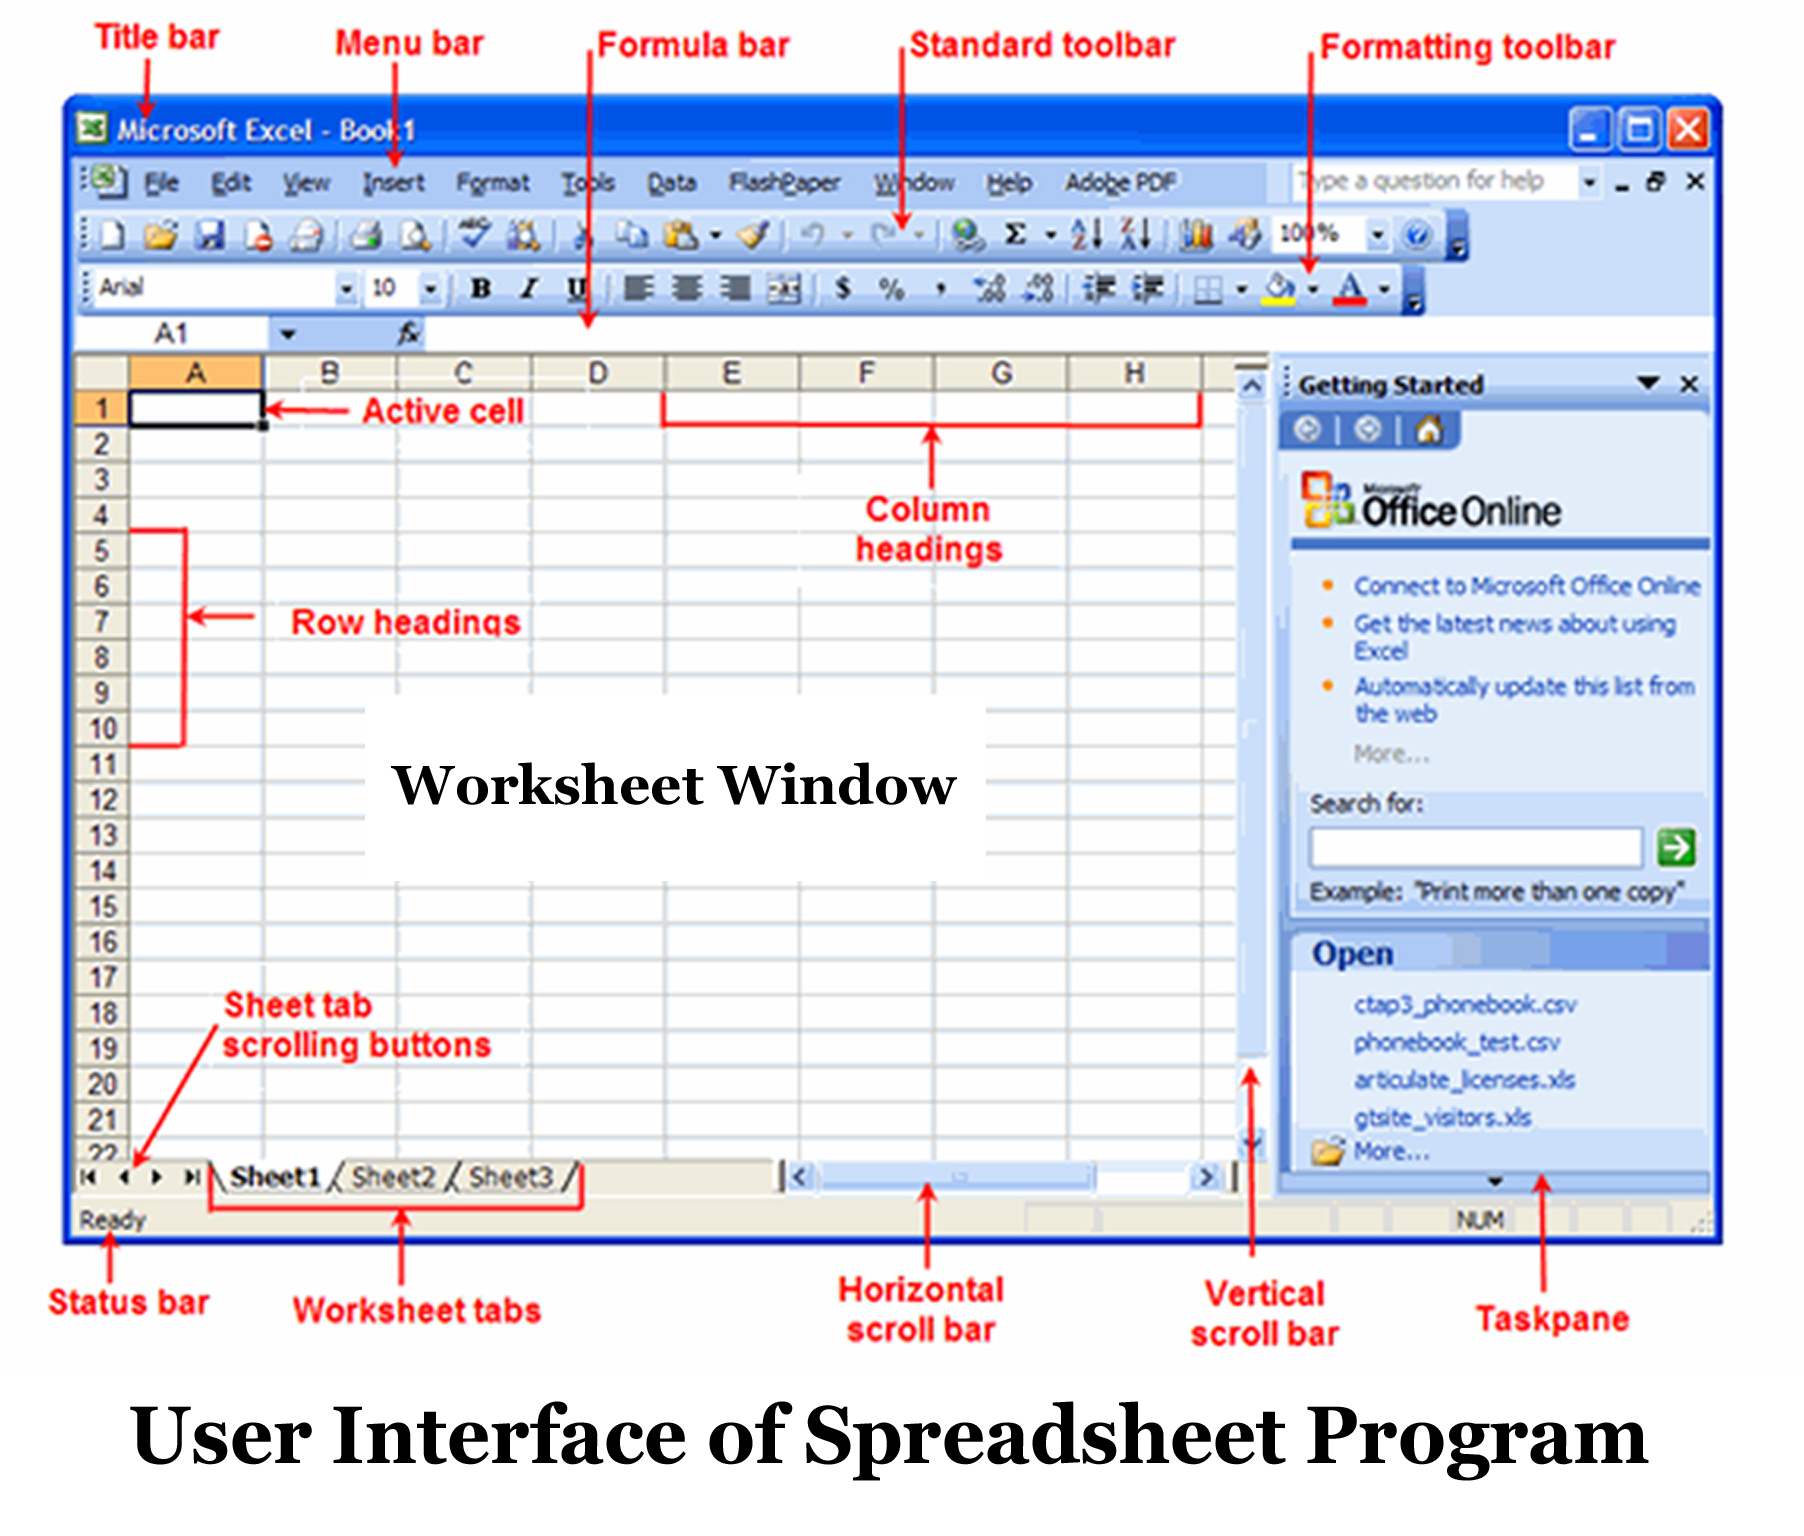 Name Of Spreadsheet Software Regarding Spreadsheet, Its Basic Features And User Interface